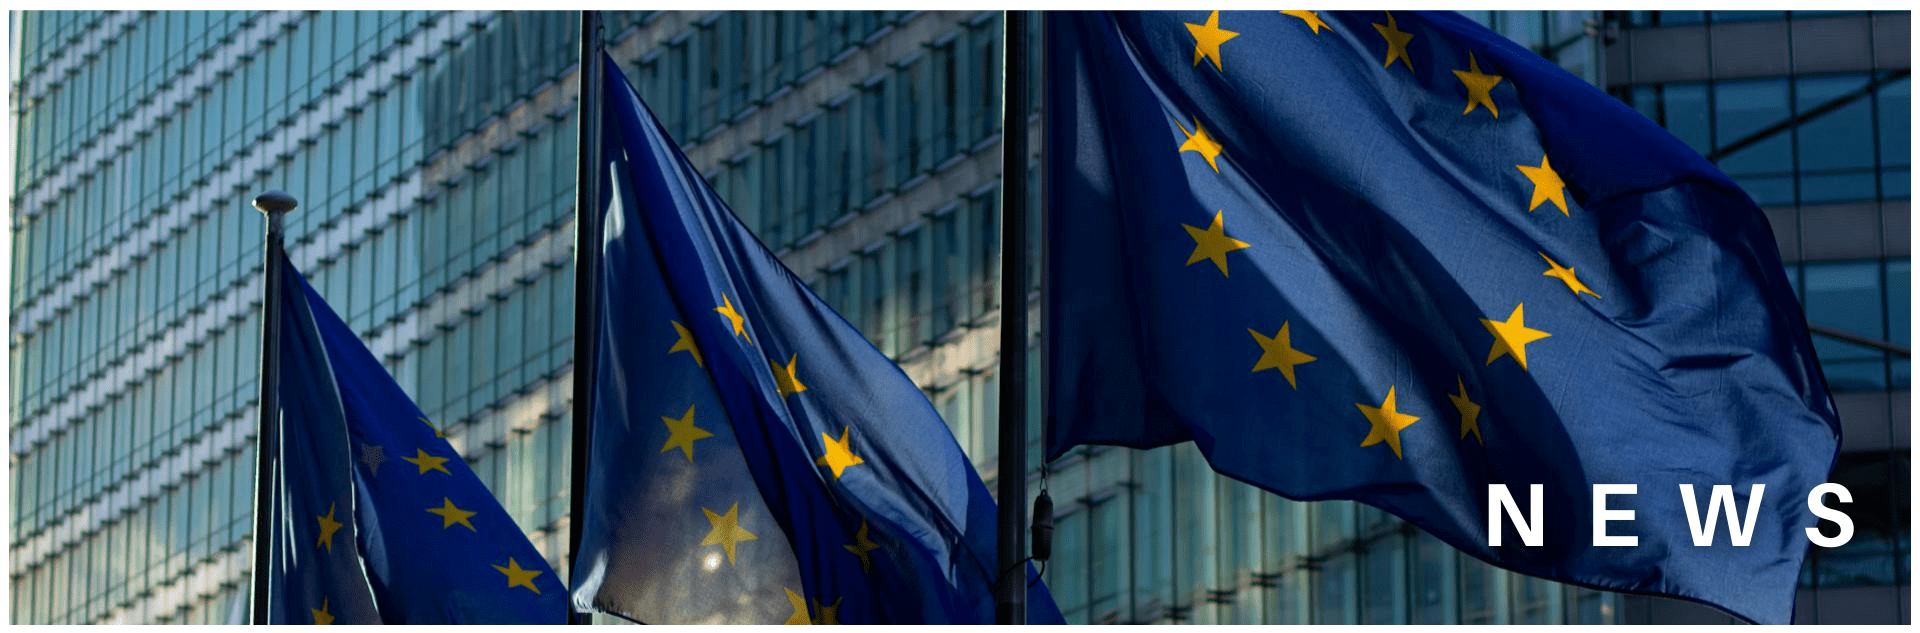 EU flags waving in front of a glass building in low sun. Copy reads: NEWS